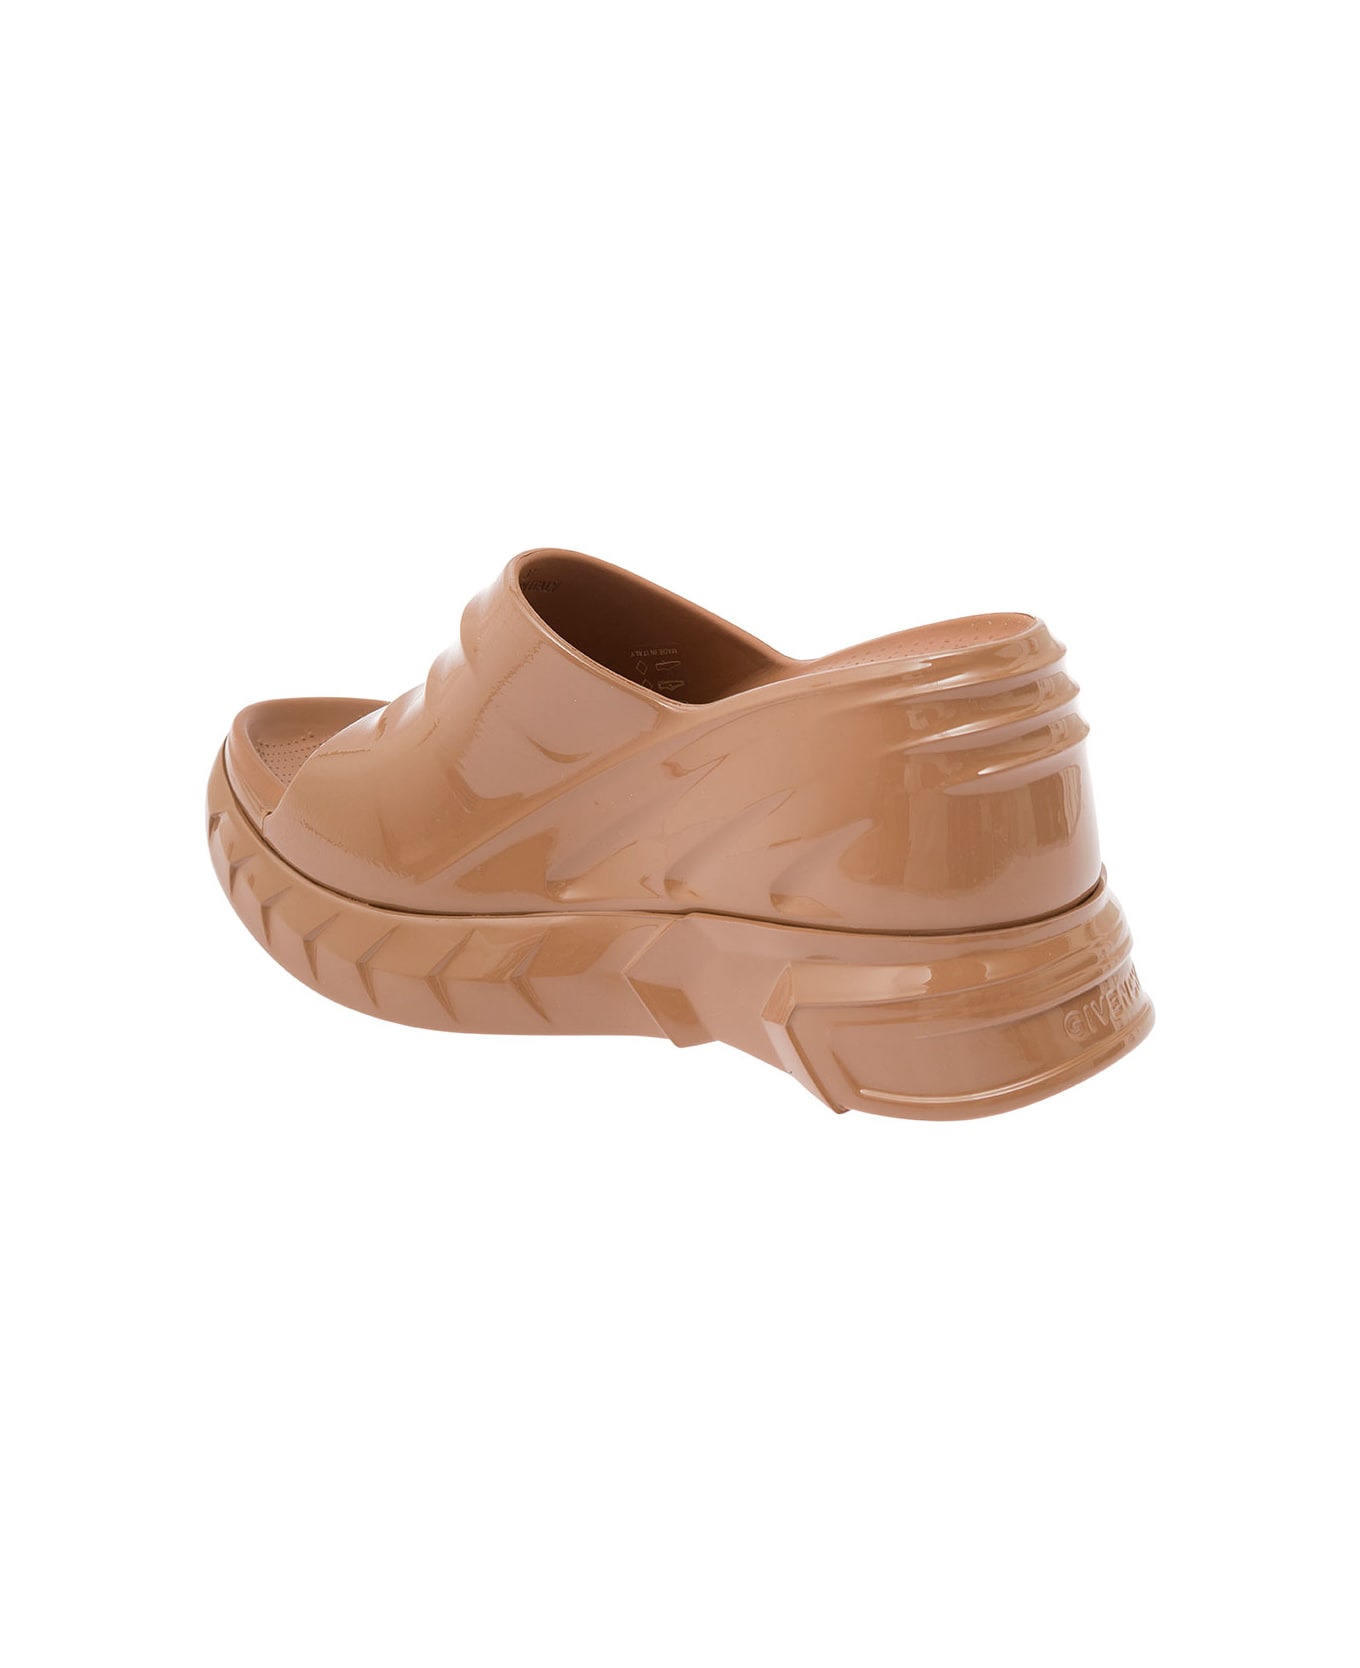 Givenchy Clay Color 'marshmallow' Wedge In Rubber Woman - Beige サンダル